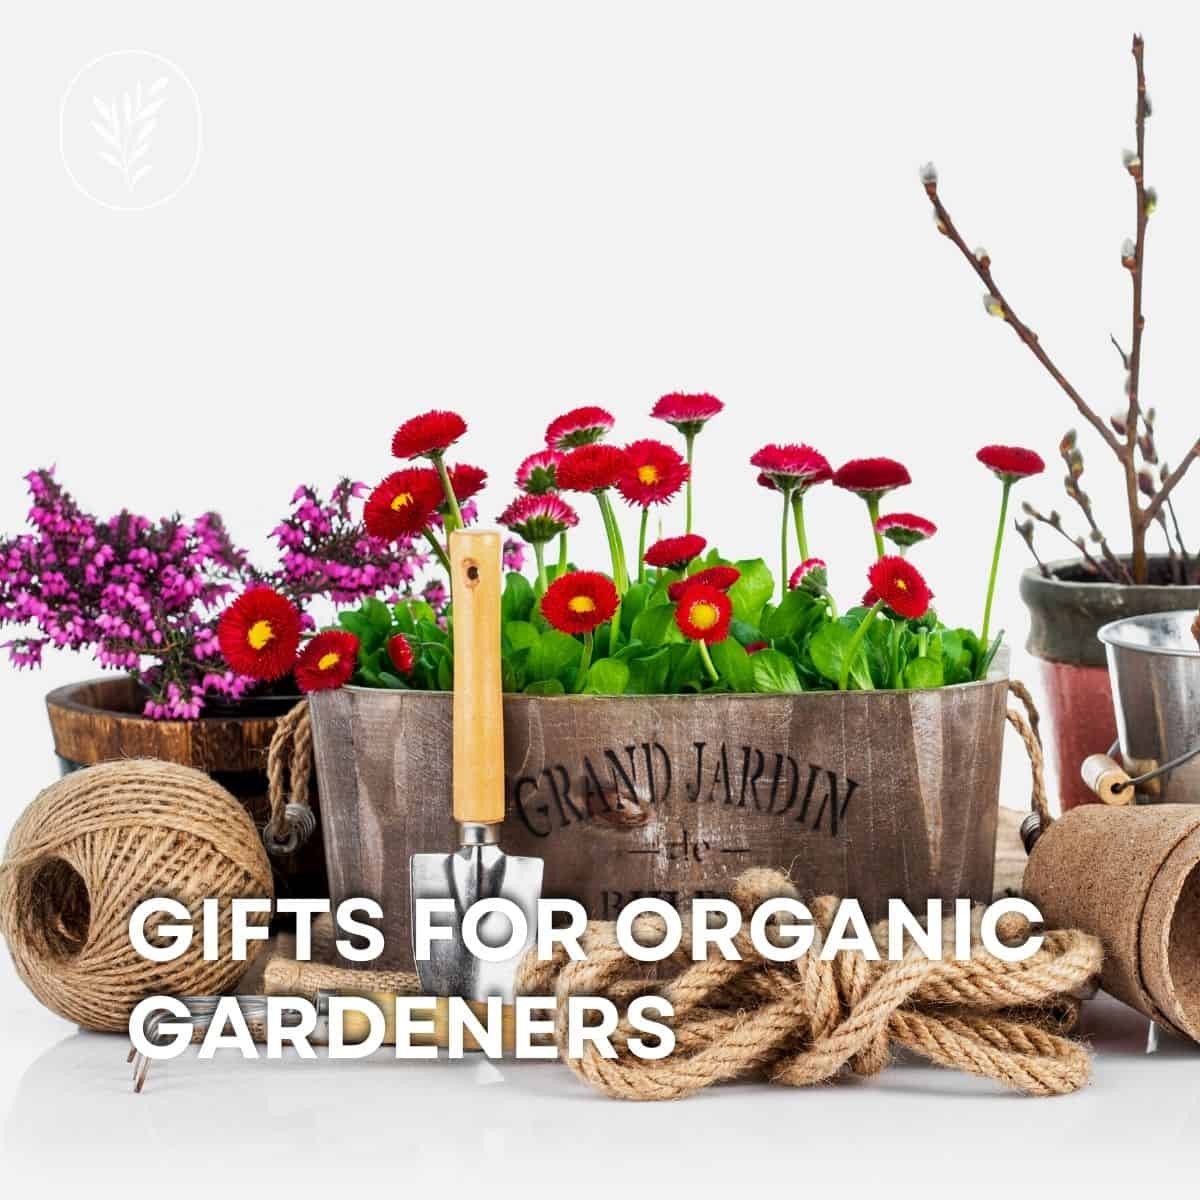 Gifts for organic gardeners via @home4theharvest